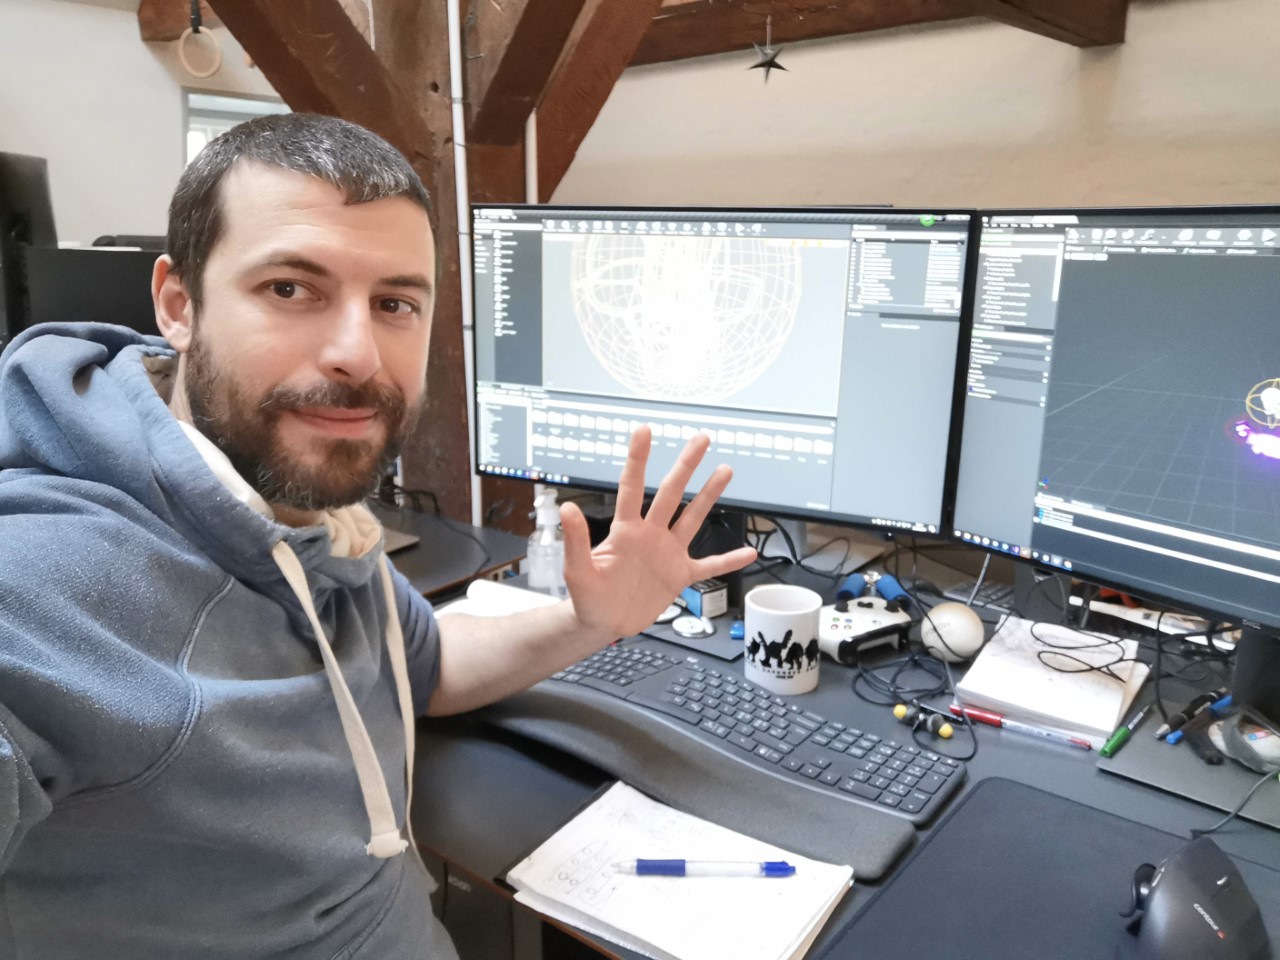 VIdeo game designer and NYSCAS alumnus Mikhail Akopyan is pictured at his desk with two screens.